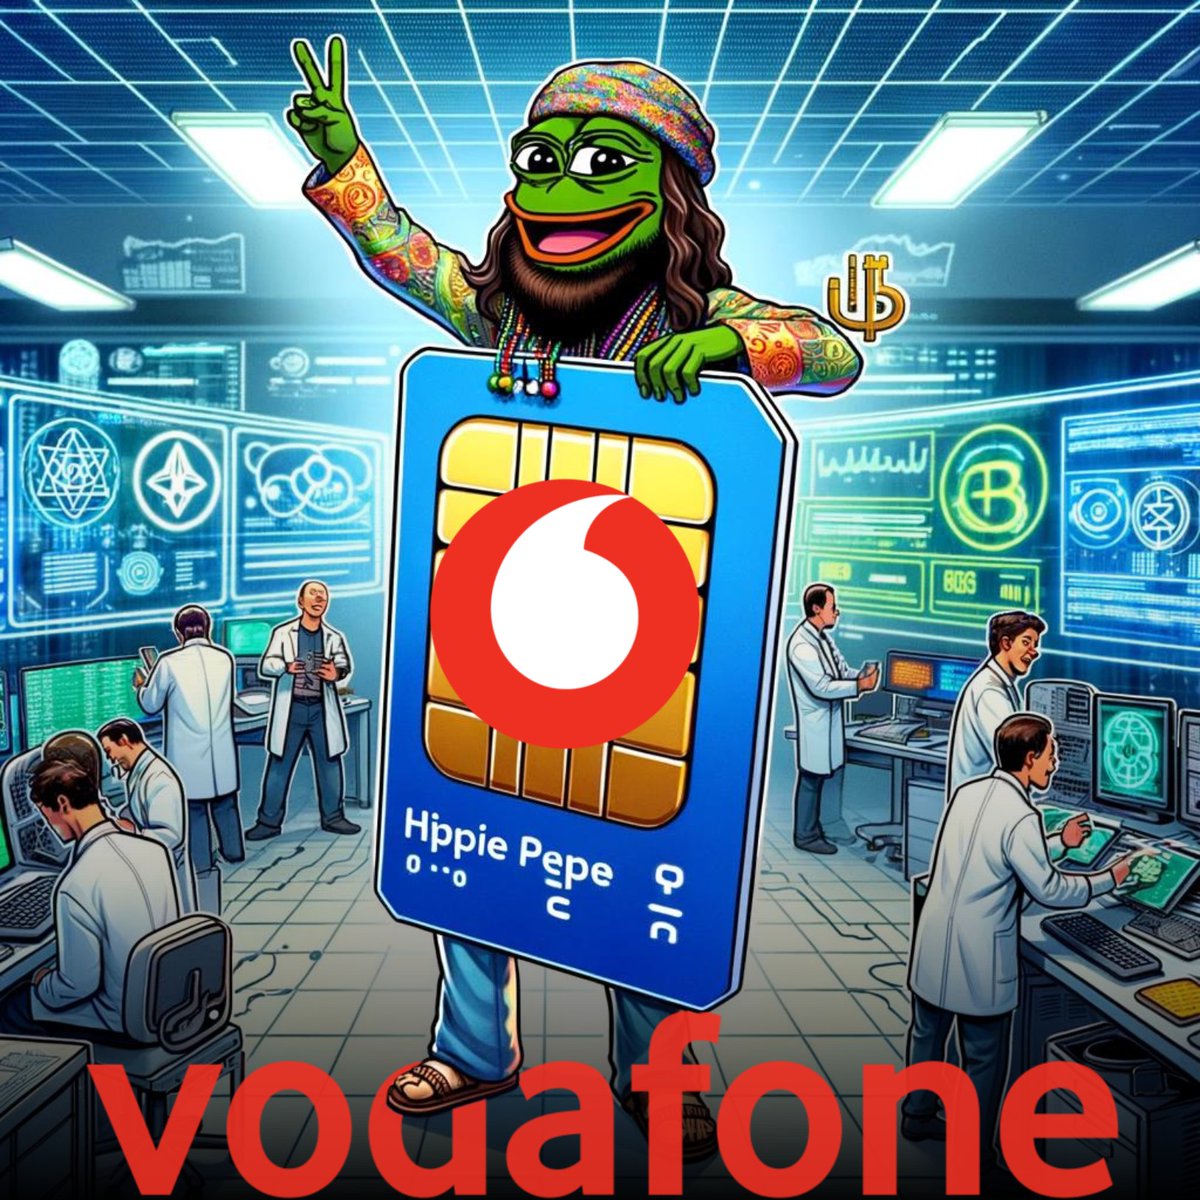 📱💰 Breaking barriers and SIM cards! Vodafone is taking a giant leap by integrating crypto wallets into SIM cards, Ready to tap into the future of mobile crypto? 🌍🚀 #hippiepepe #SIMplifyCrypto #techrevolution  #VodafoneCrypto #CryptoWallets #SIMIntegration